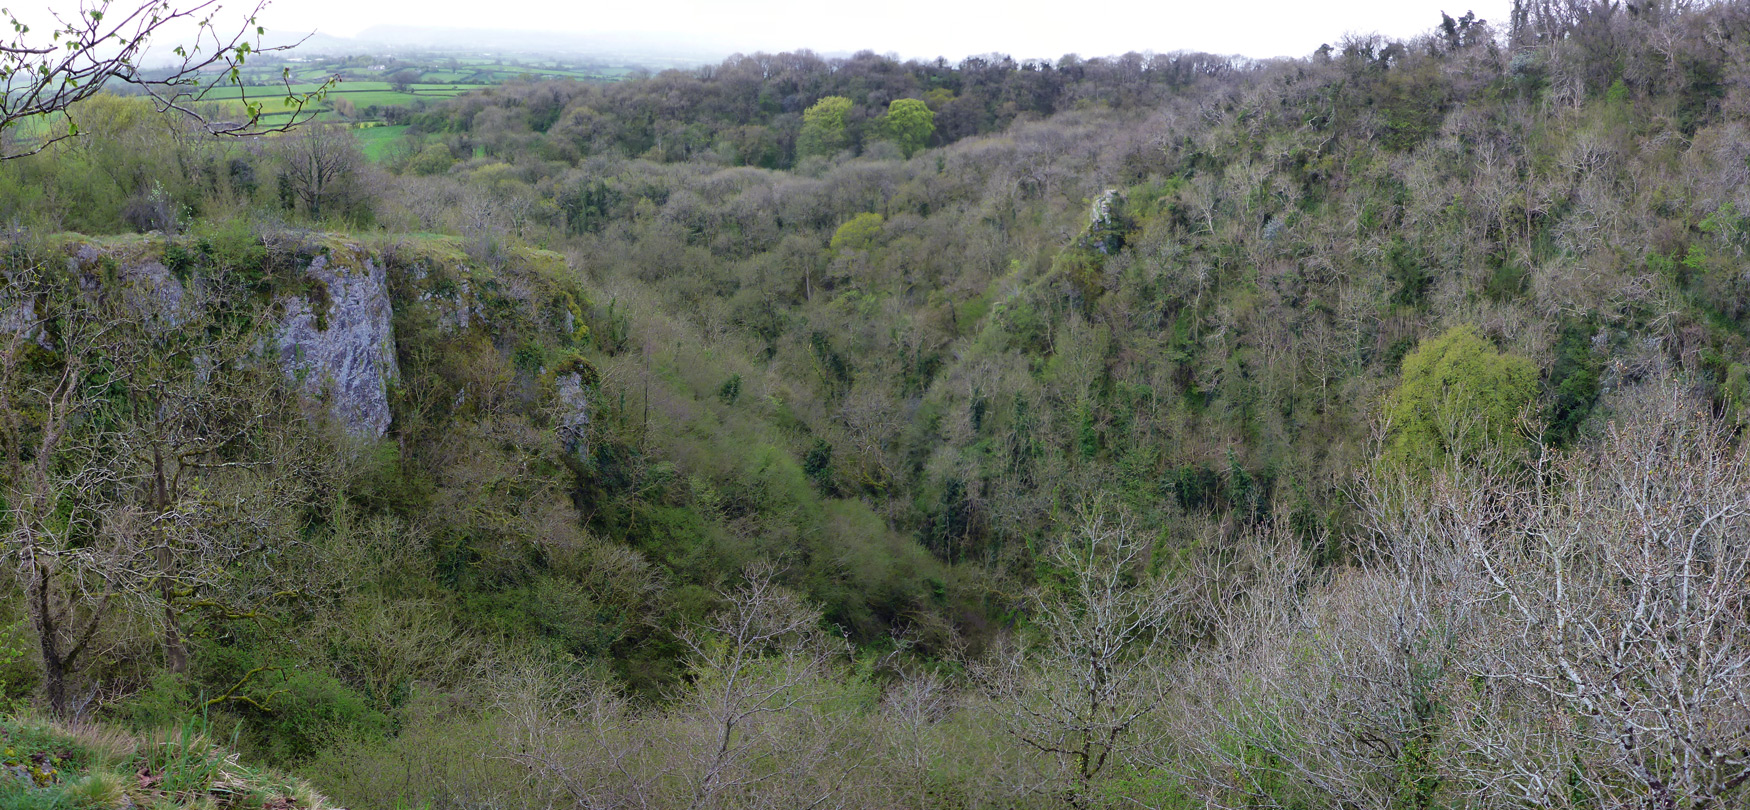 Viewpoint above the gorge